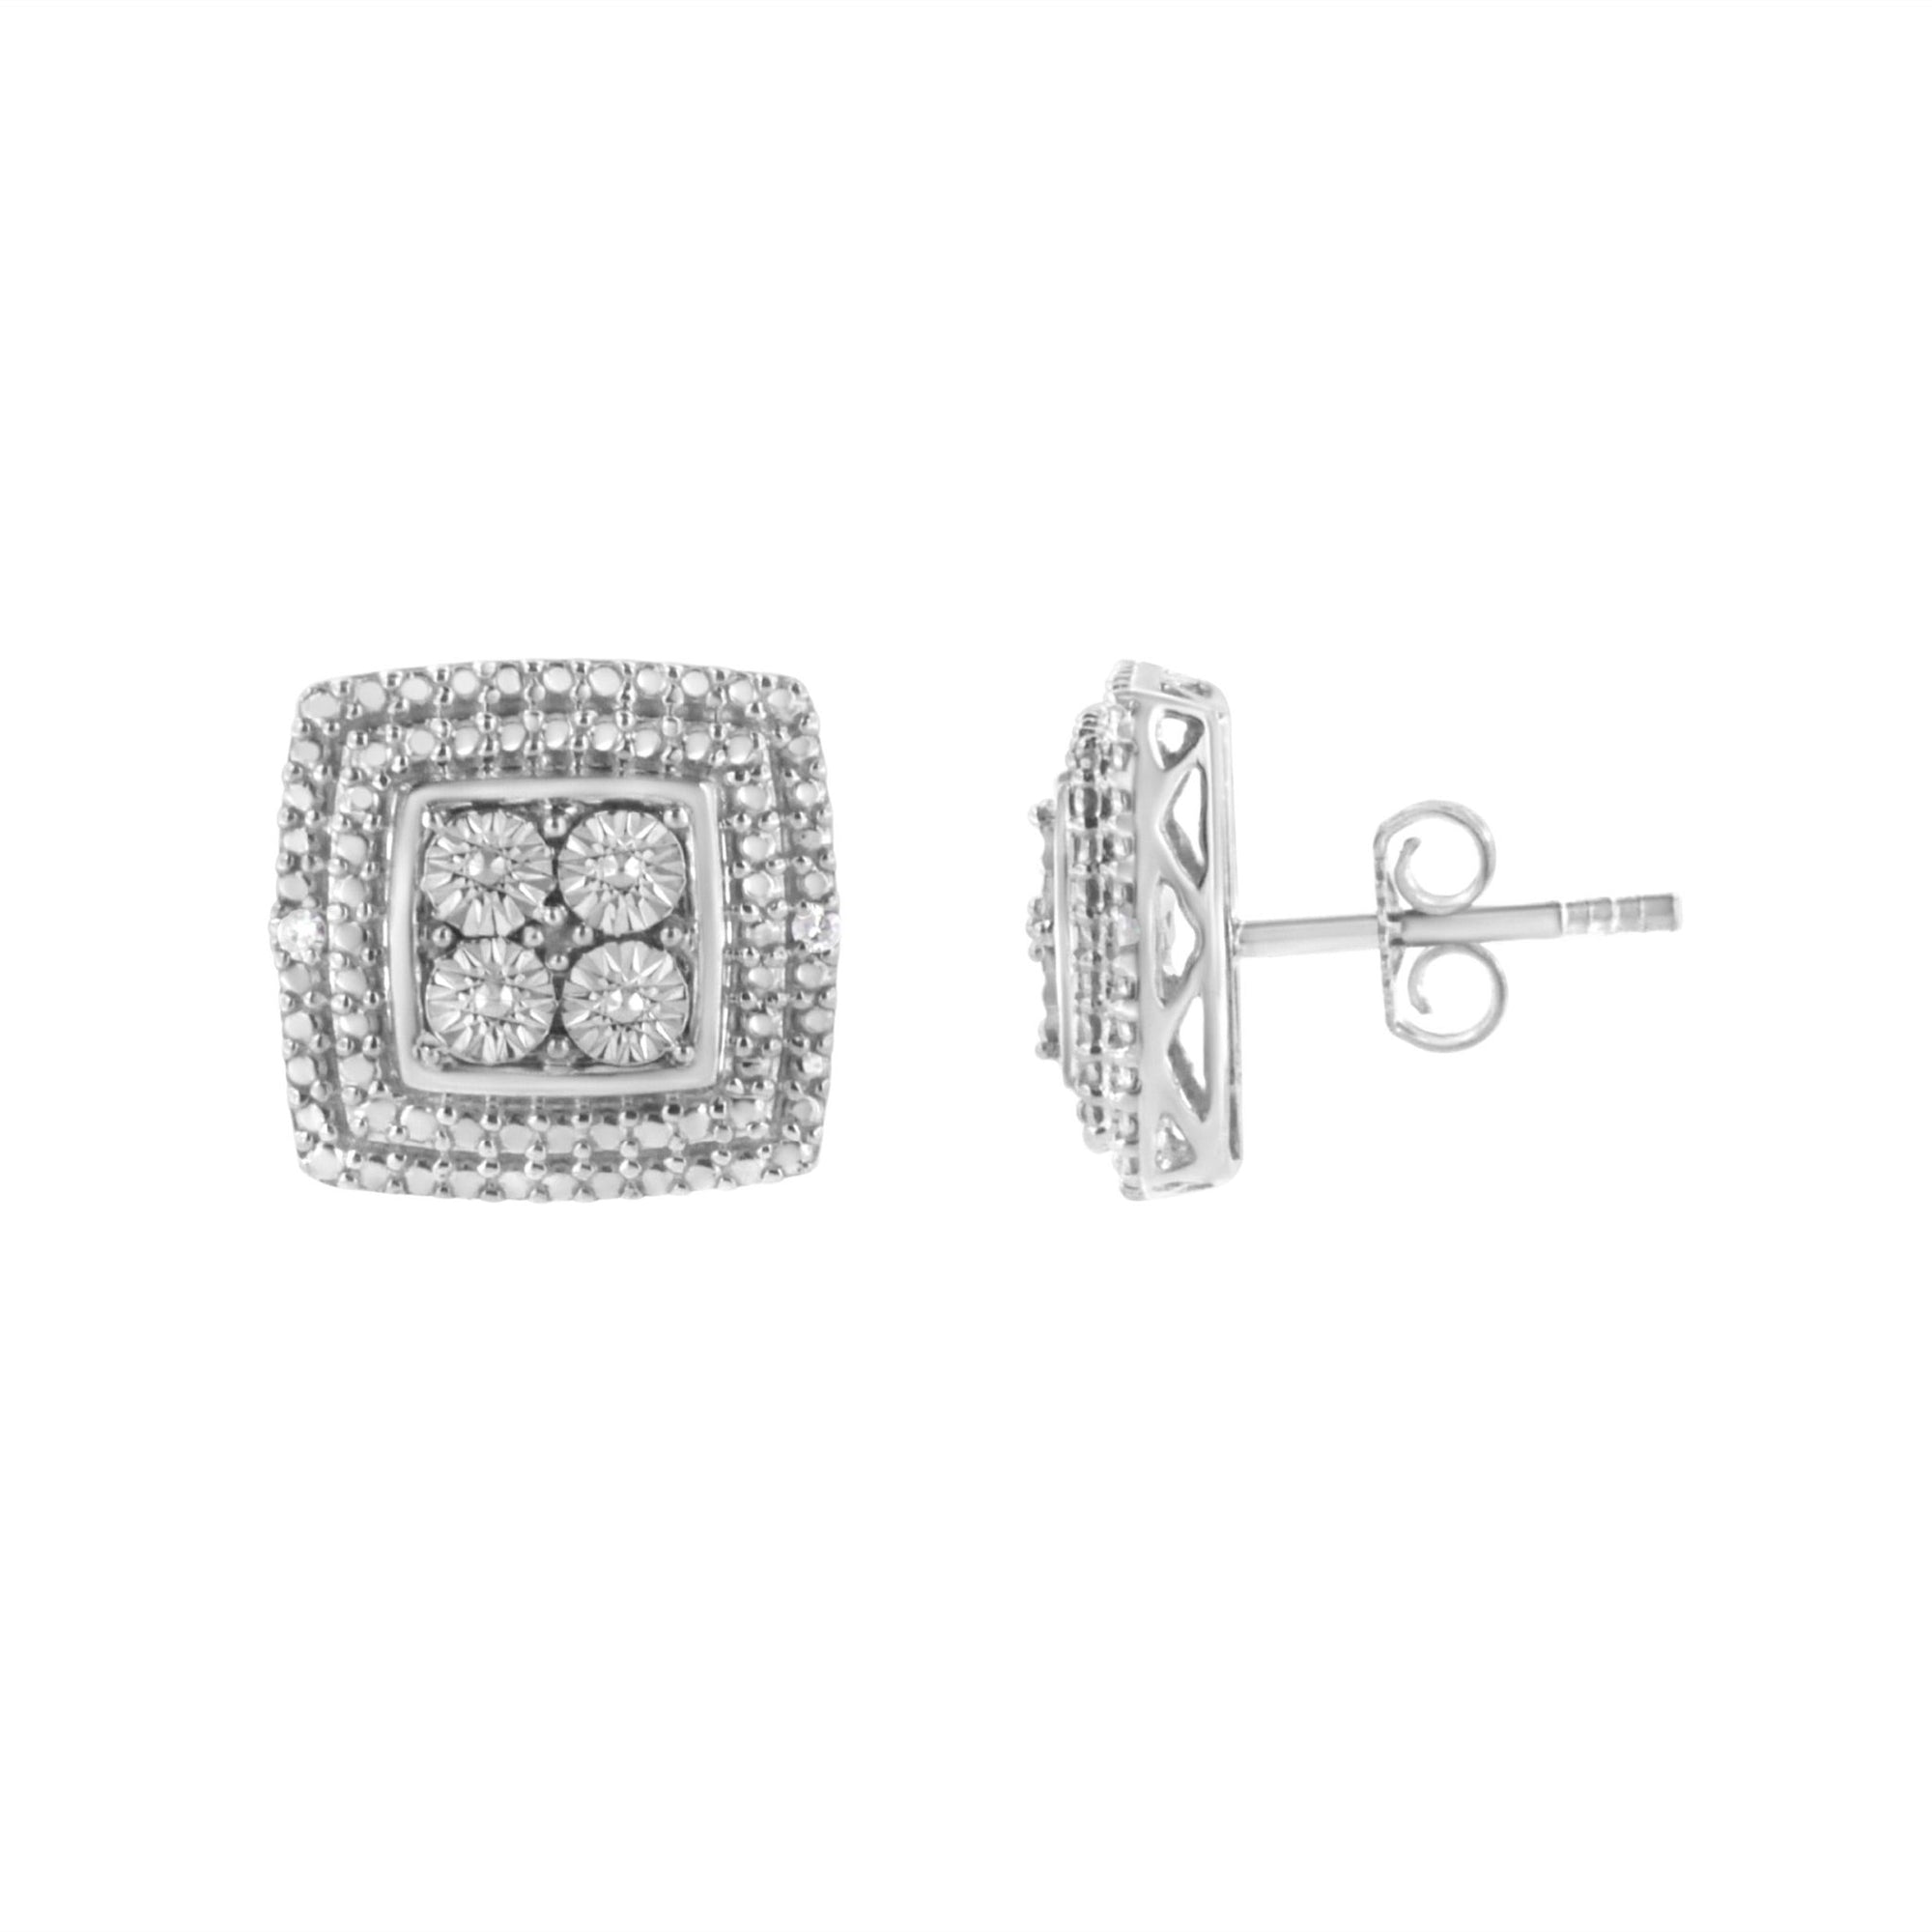 .925 Sterling Silver Diamond Accented Square Shaped Milgrain Stud Earrings (I-J Clarity, I3 Color) - LinkagejewelrydesignLinkagejewelrydesign